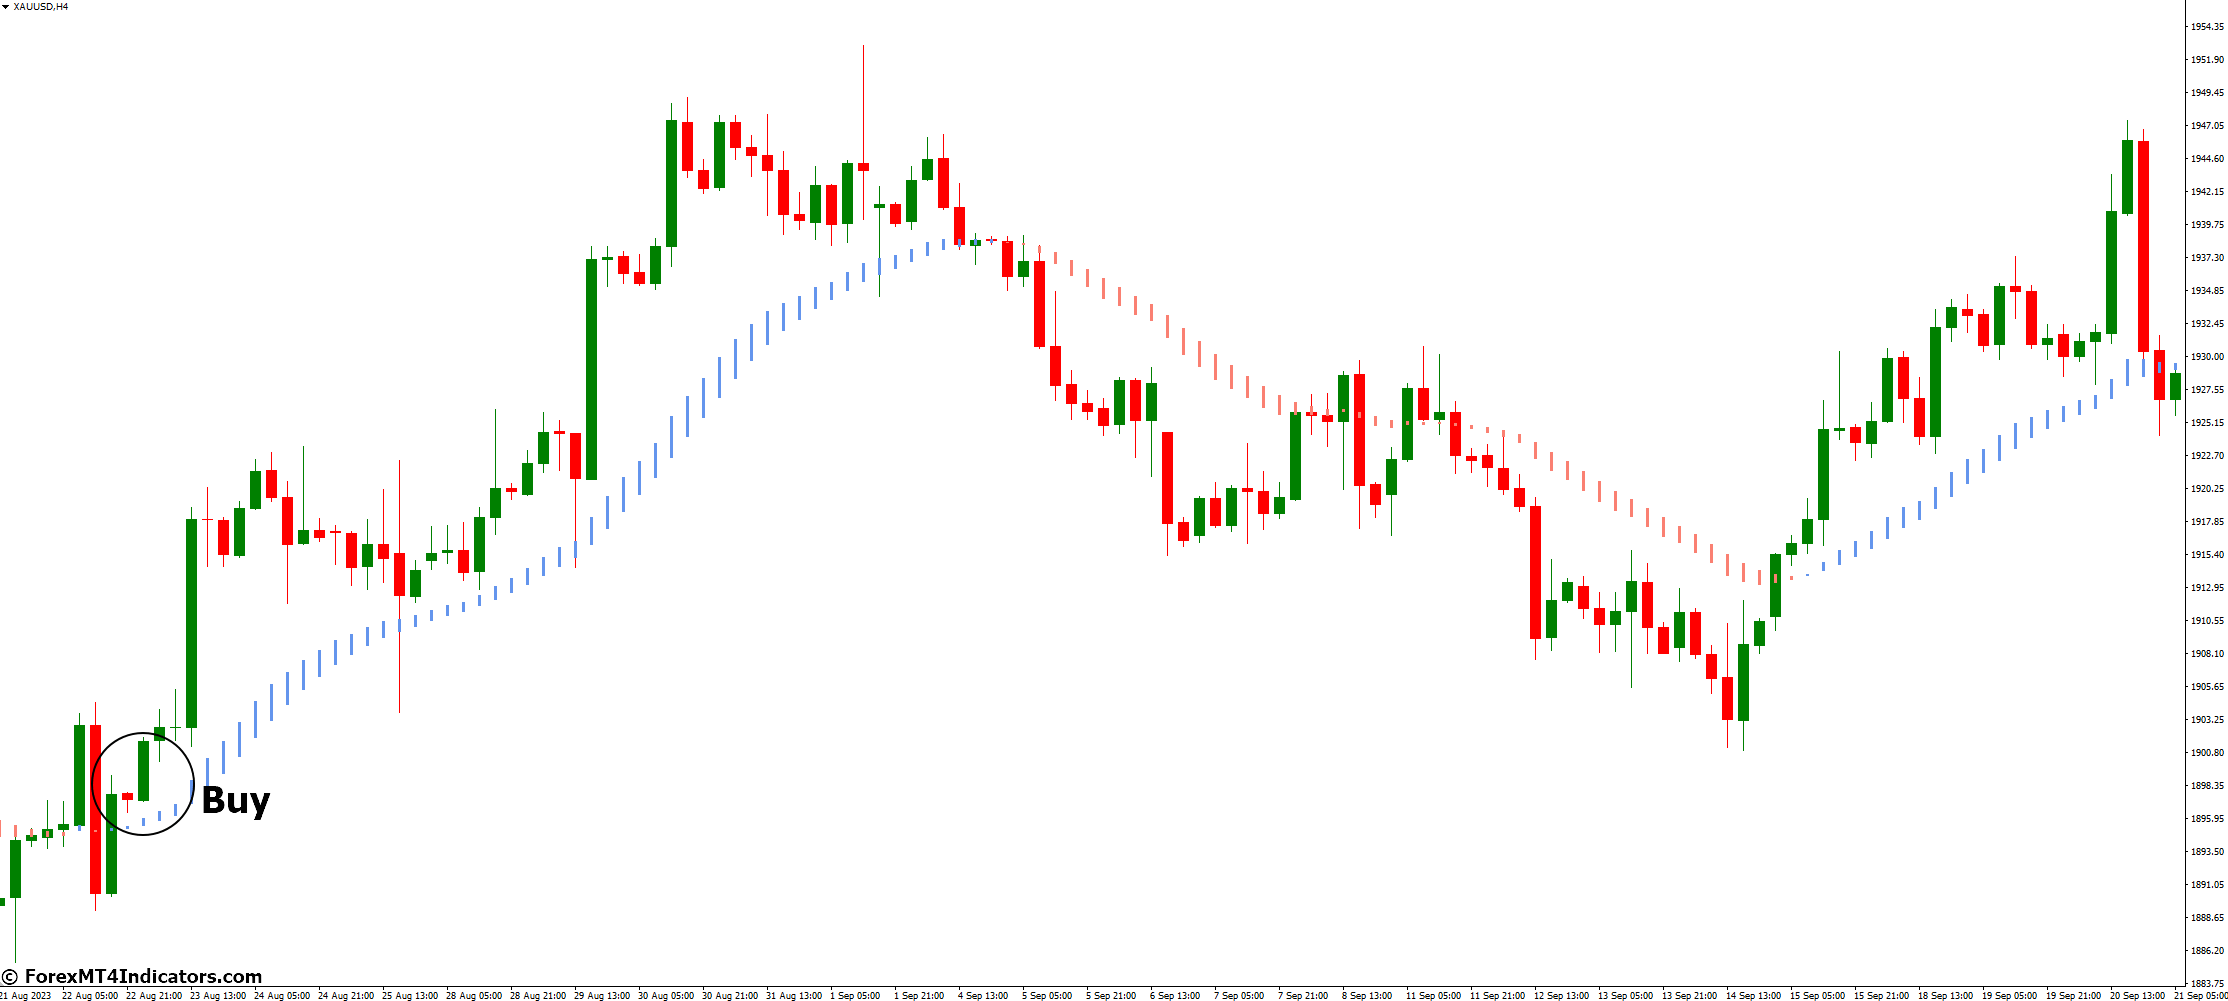 How to Trade with Trend Lord NRP MT4 Indicator - Buy Entry